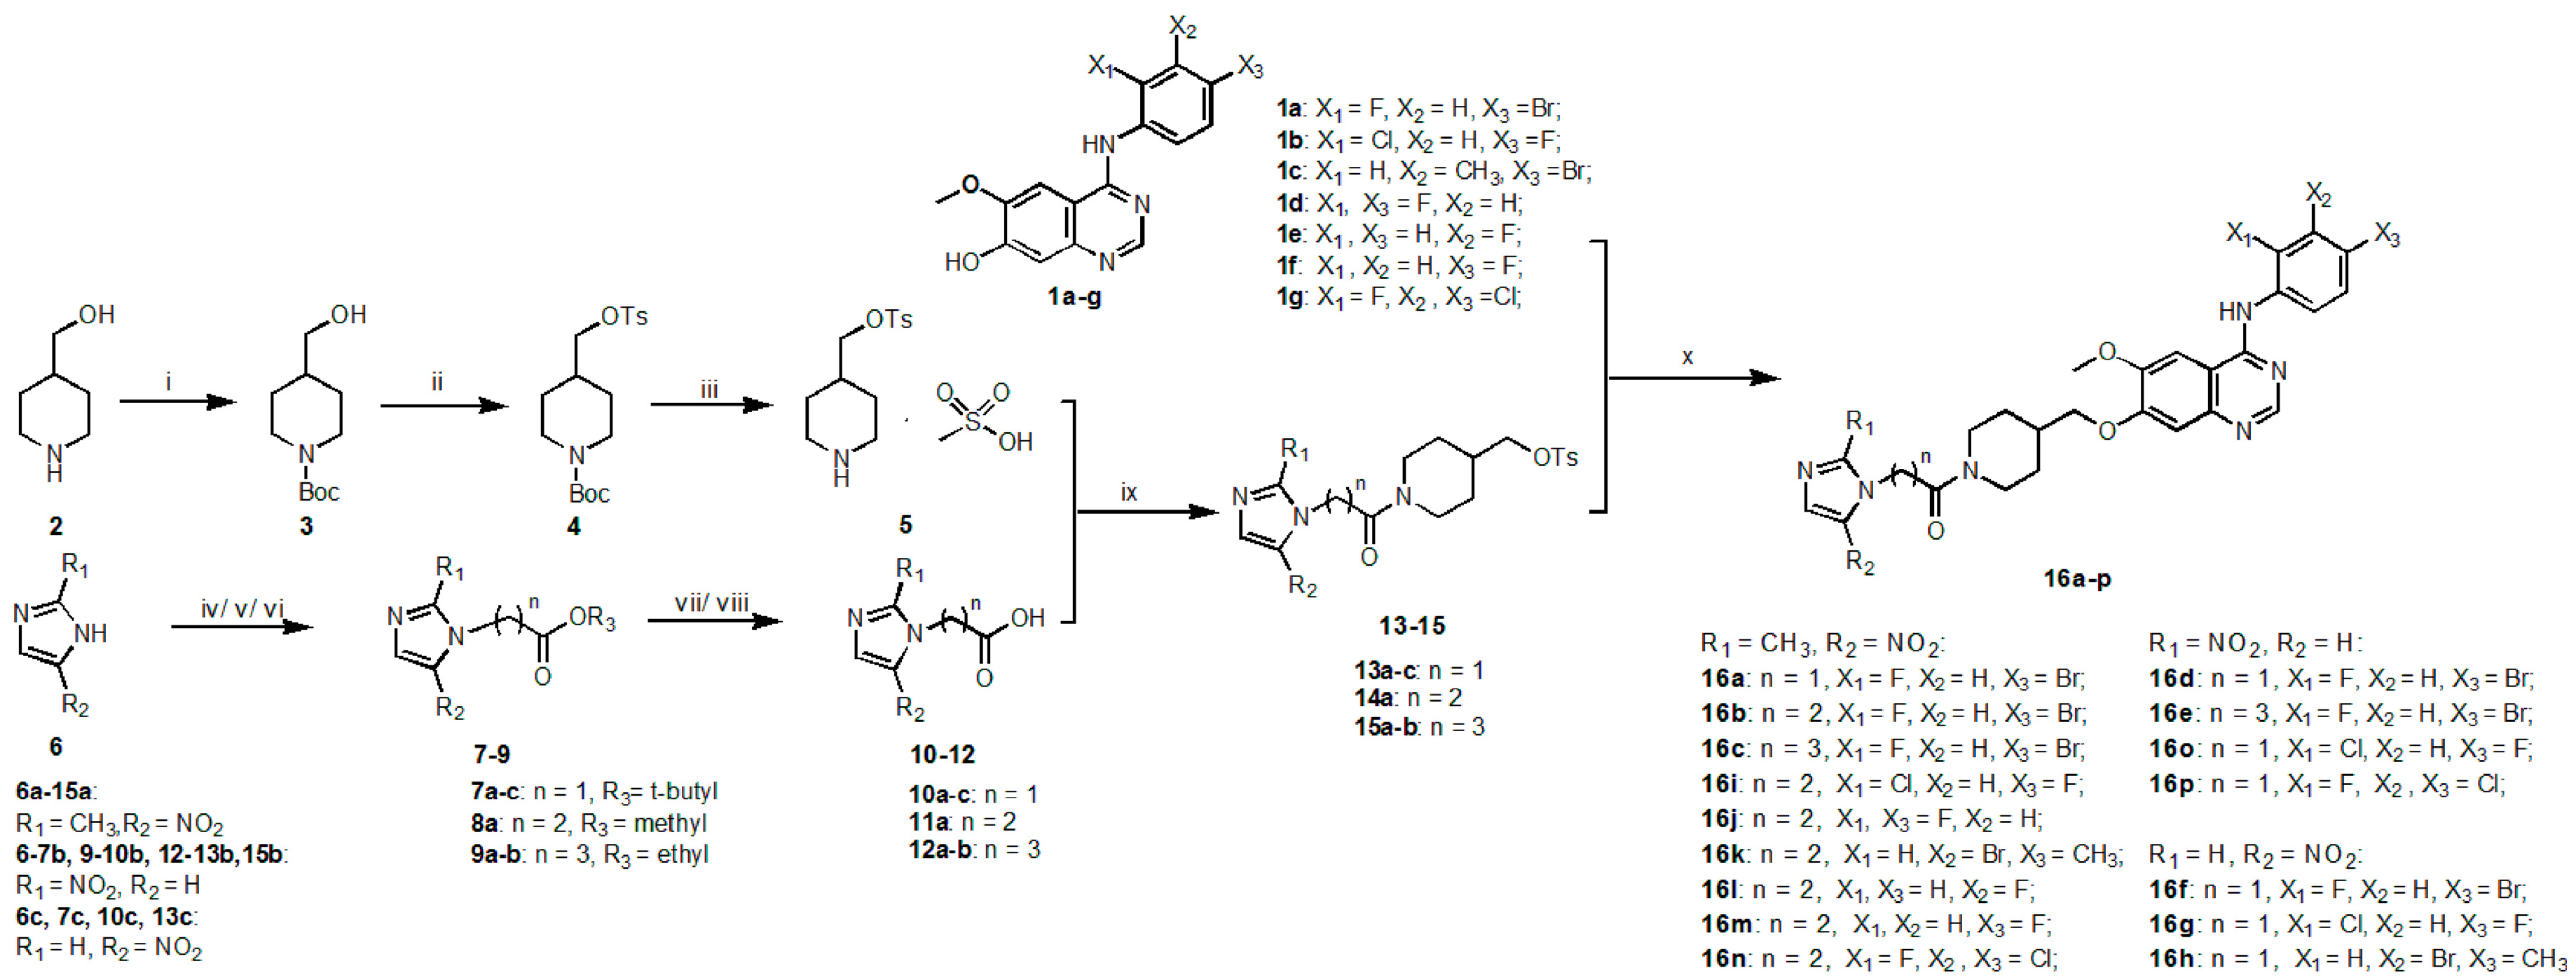 Molecules Free Full Text Design And Synthesis Of Vandetanib Derivatives Containing Nitroimidazole Groups As Tyrosine Kinase Inhibitors In Normoxia And Hypoxia Html